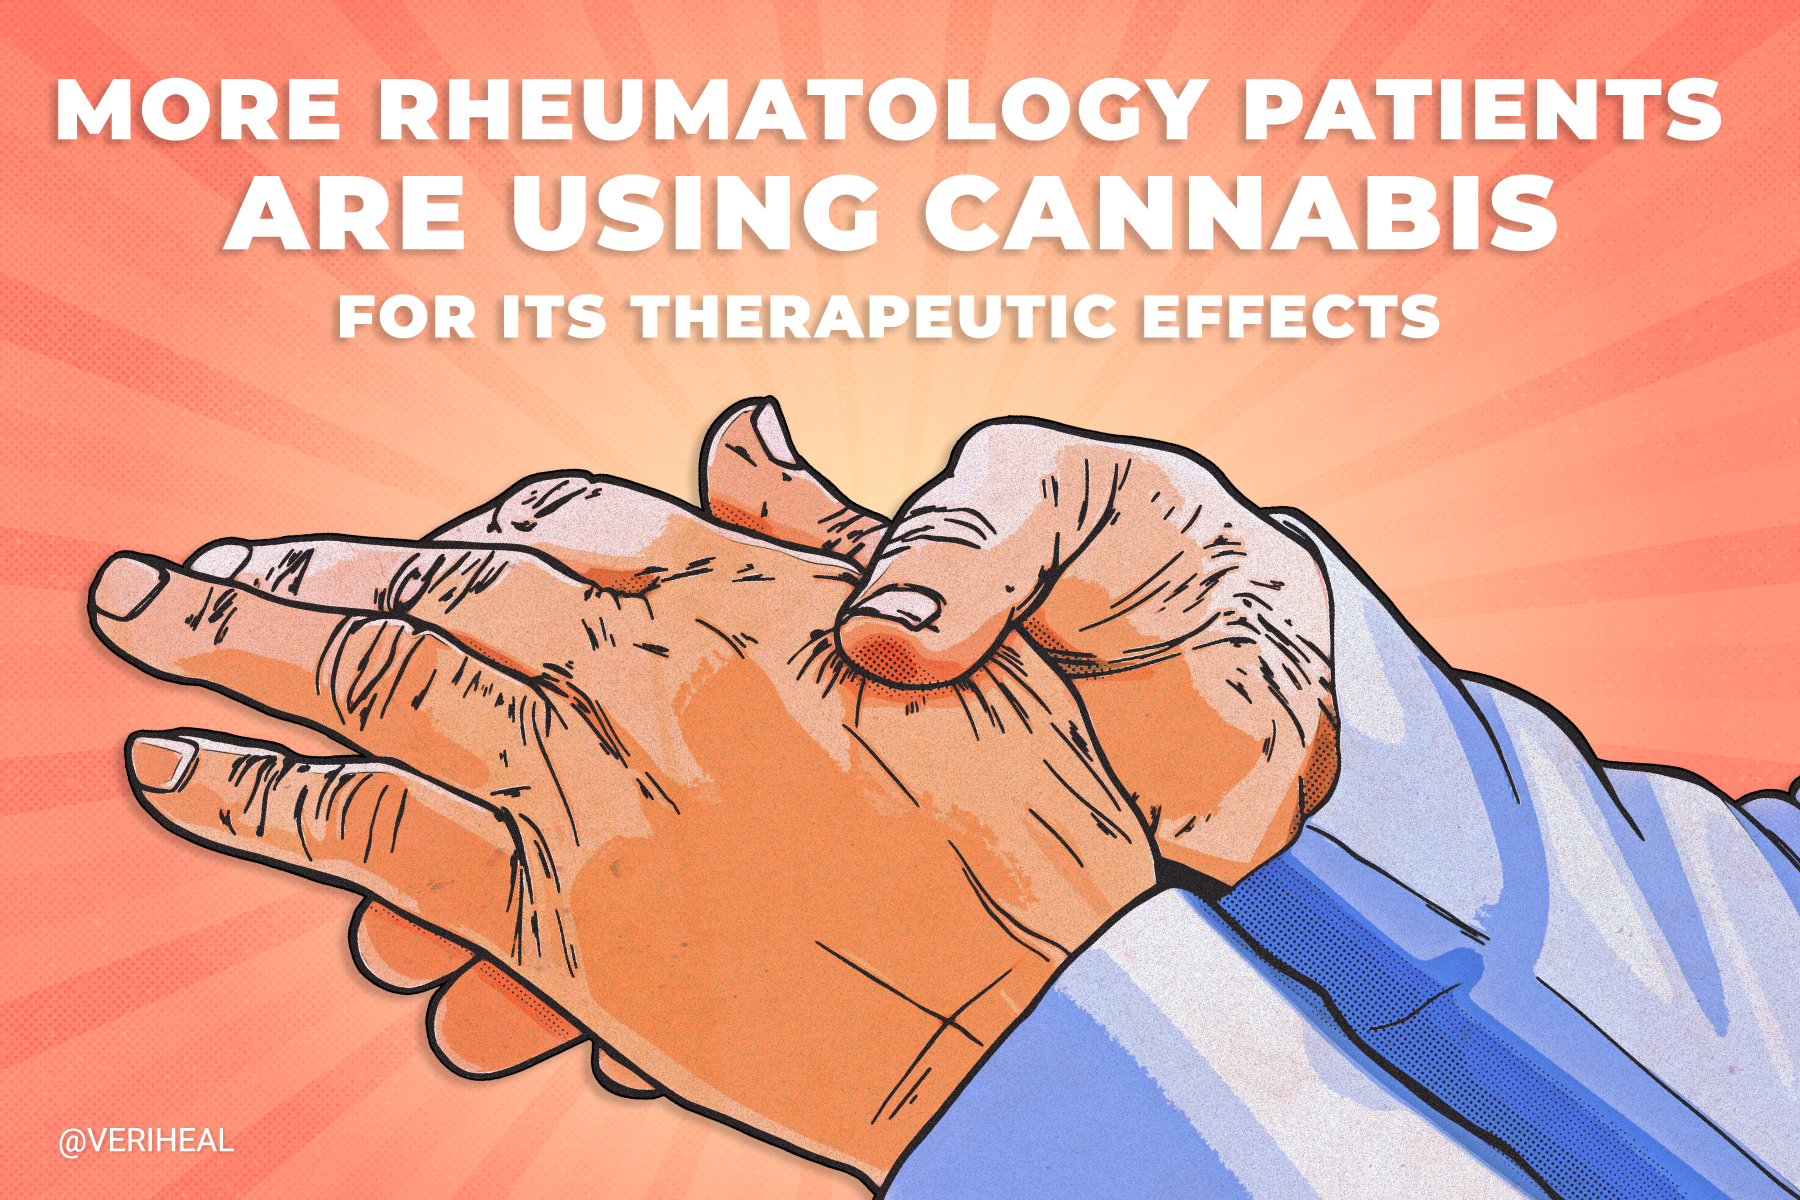 More Rheumatology Patients Are Using Cannabis for Its Therapeutic Effects